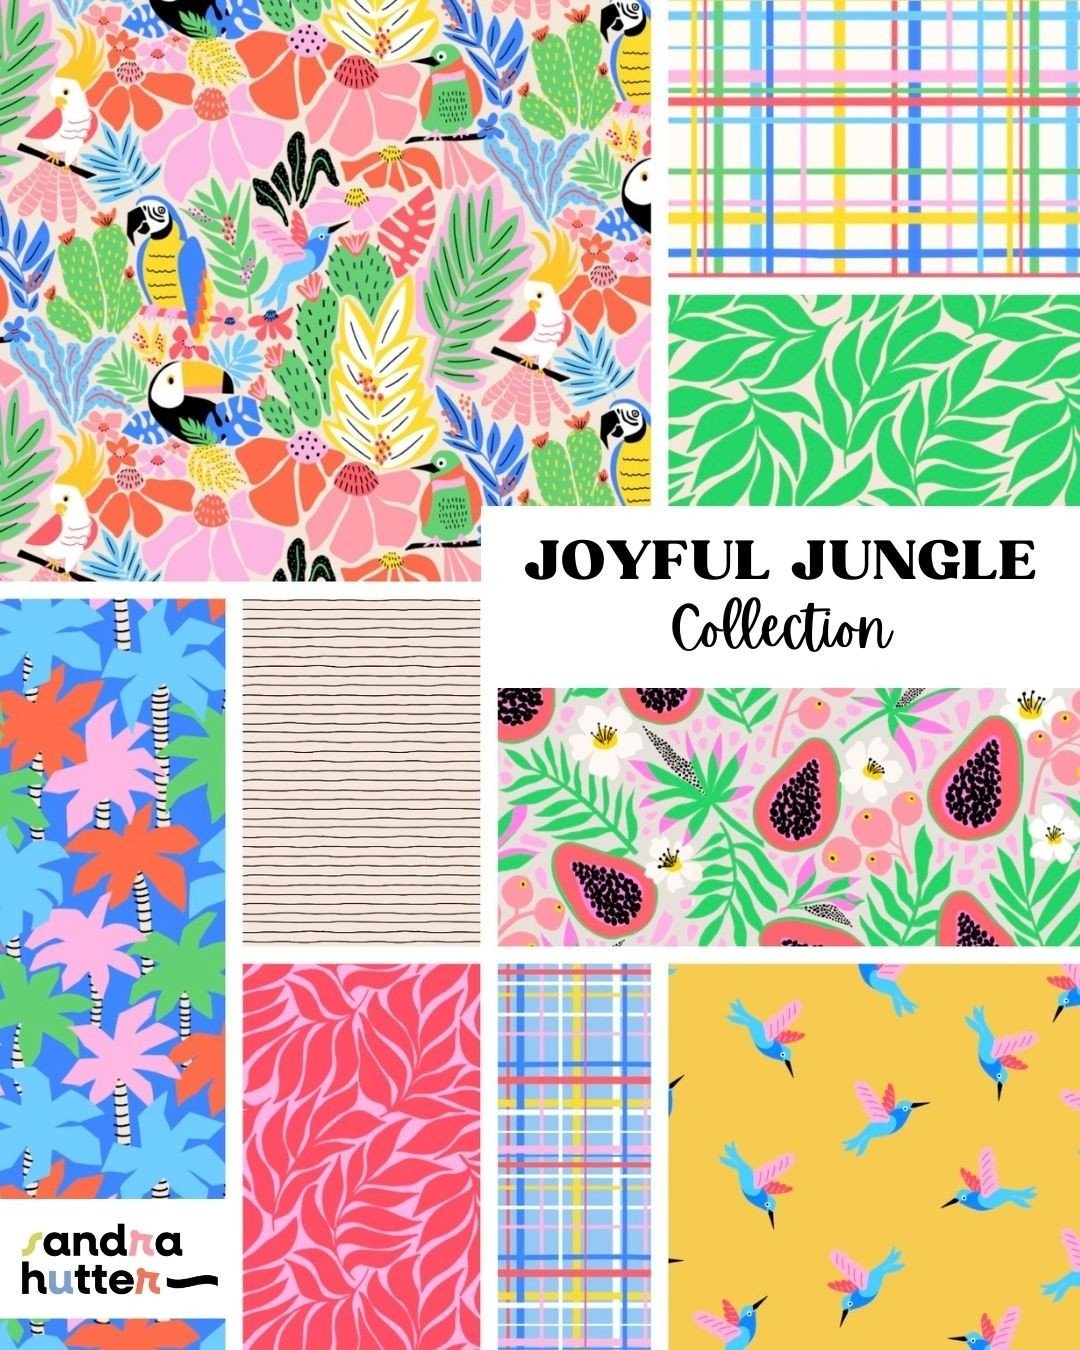 The full Joyful Jungle collection is now available @spoonflower, offering a wide range of fabric options, wallpaper, and home decor to suit your every need!⁠
⁠
What creative ideas do you have for using it?⁠
⁠🌺🌴Find the link in my bio 🌿🌺